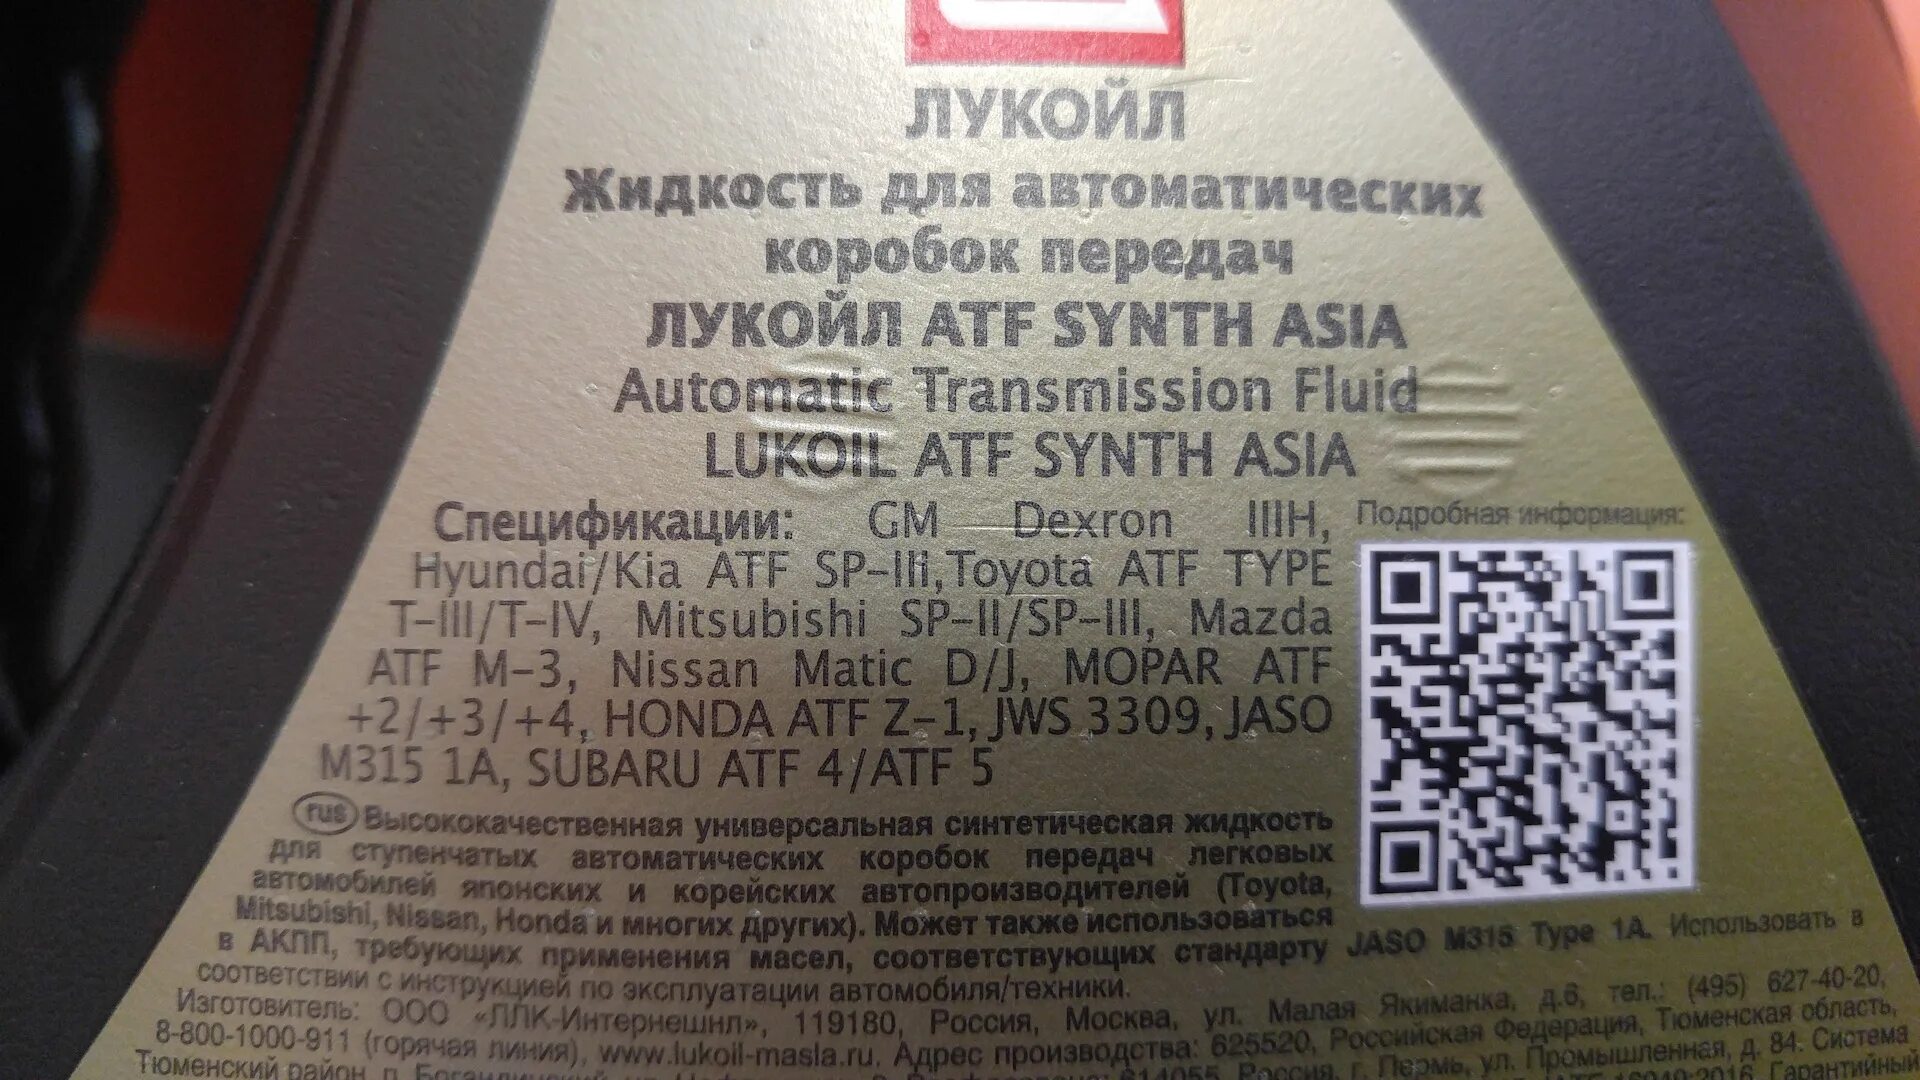 Лукойл ATF Synth Asia 4. 3132621 Лукойл ATF Synth Asia 4л. Lukoil ATF Synth Asia Mopar +4. Lukoil 191353. Лукойл atf asia